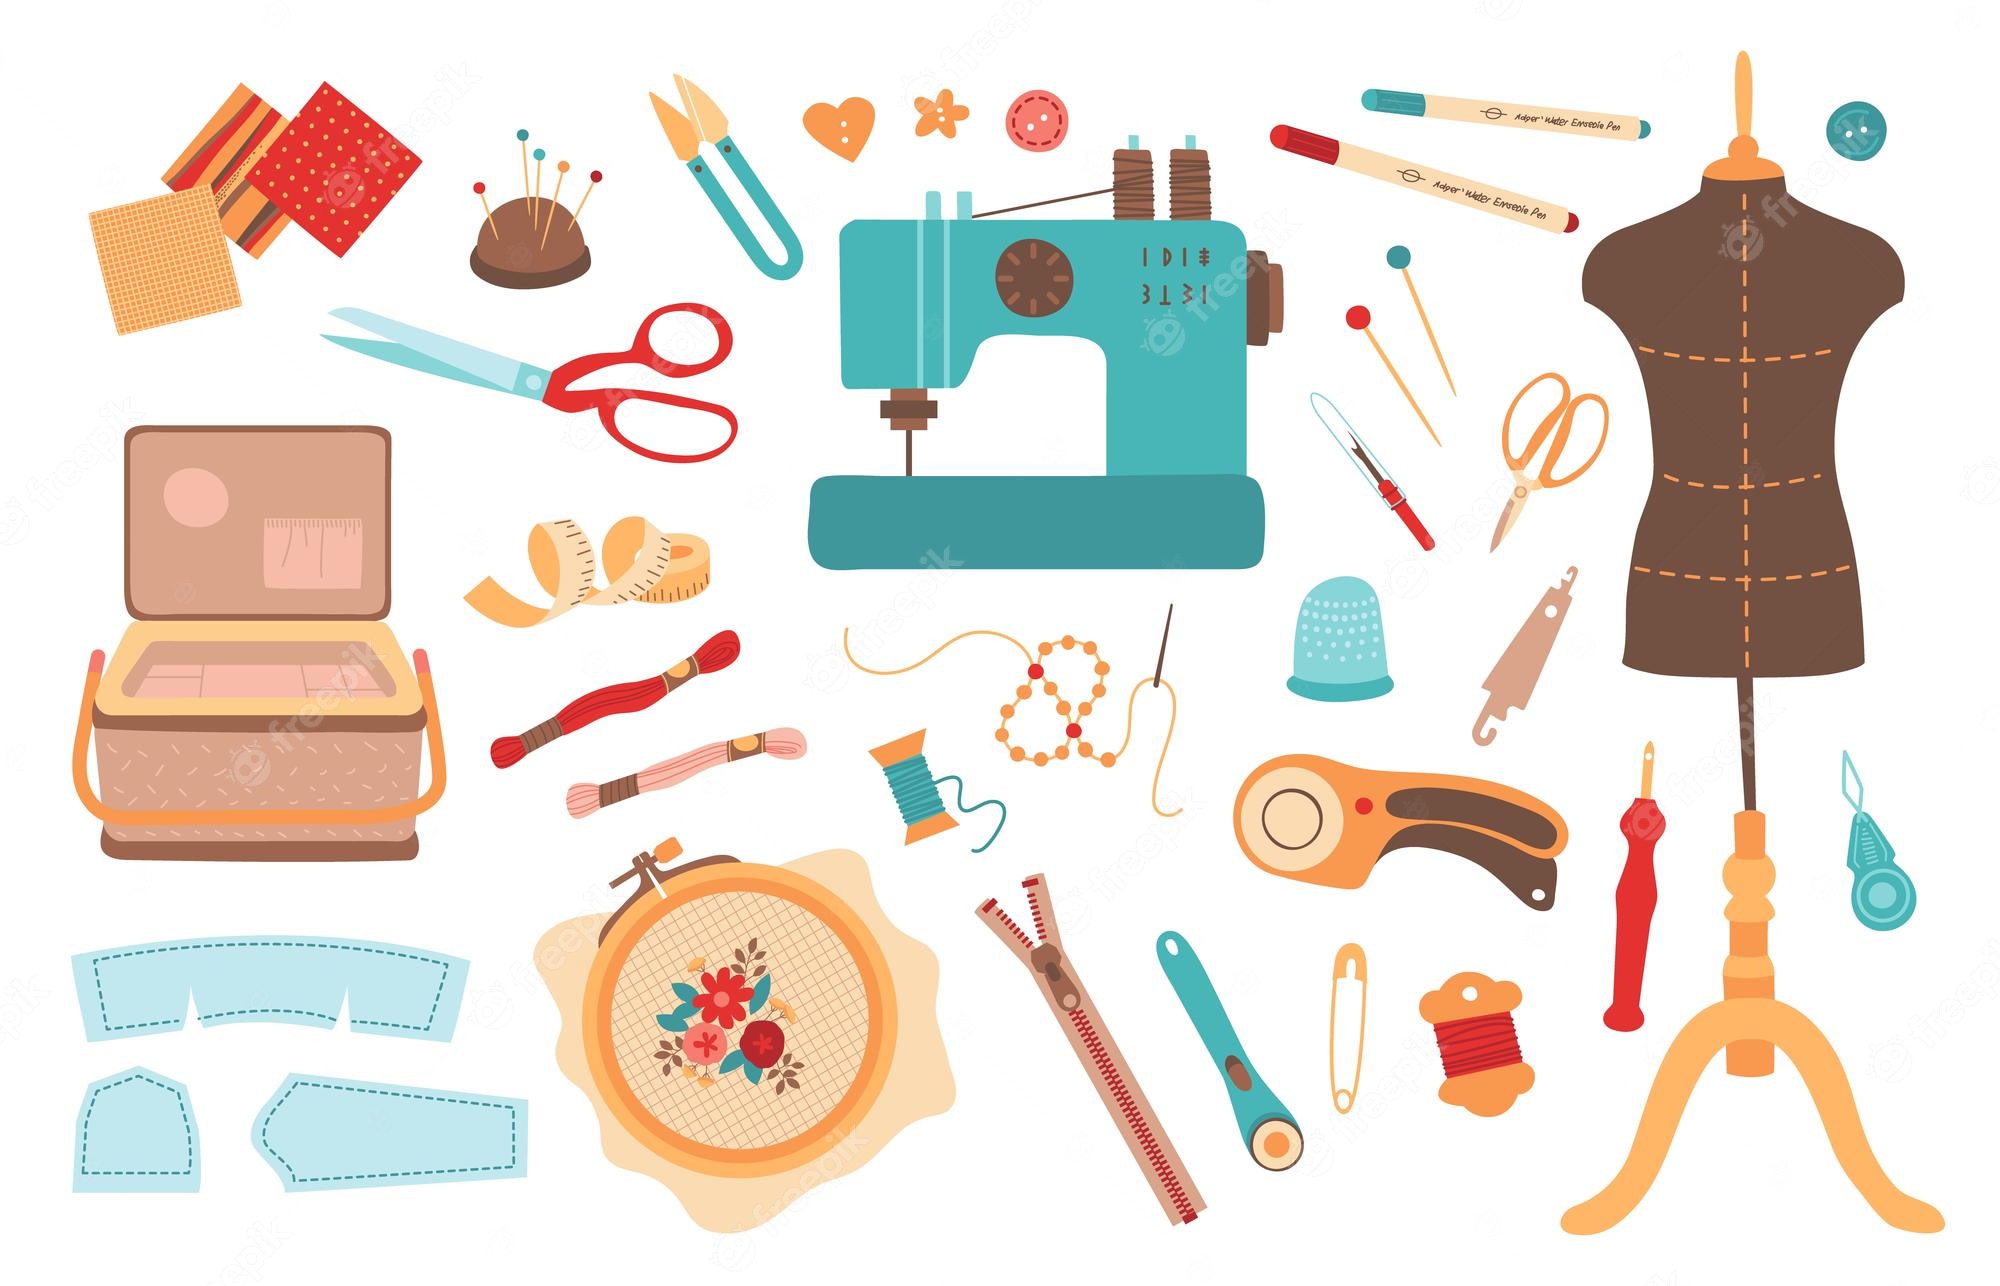 embroidery toolss - Clip Art Library